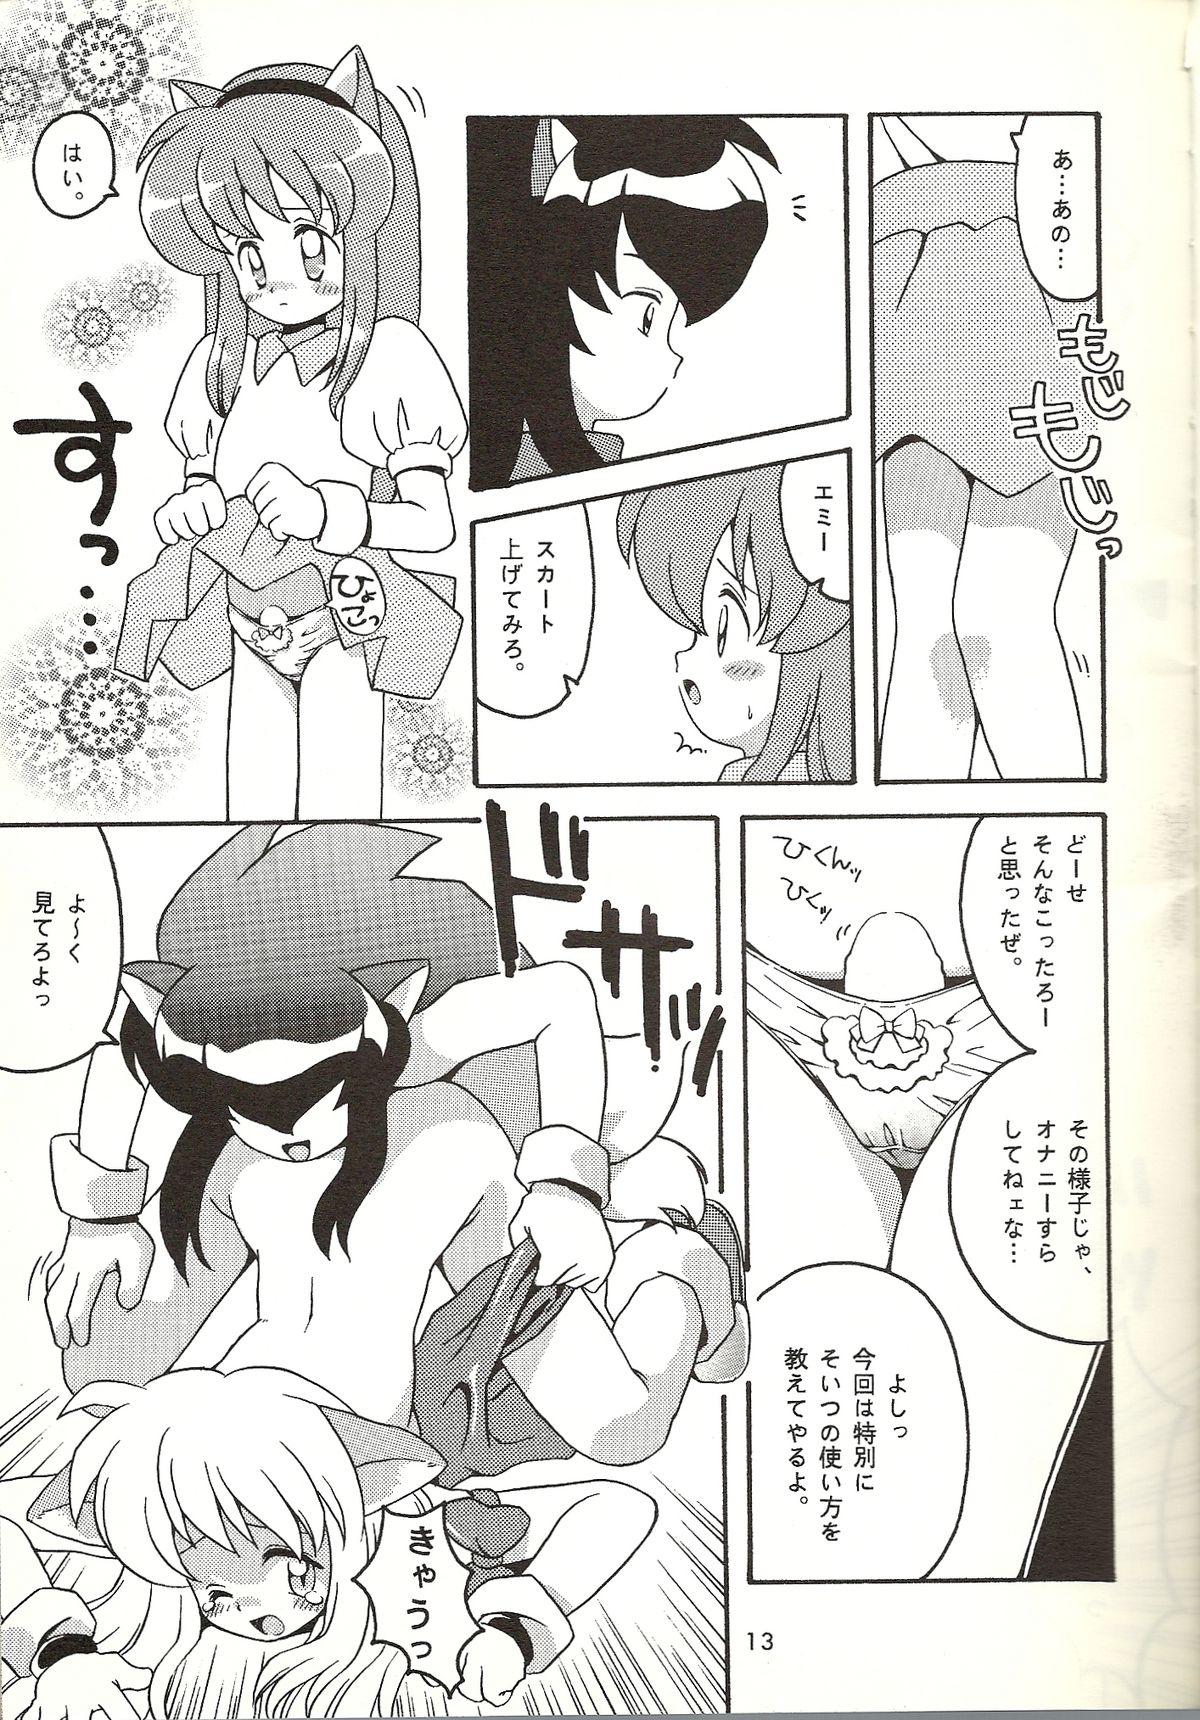 Bedroom O - Guardian heroes Sonic the hedgehog Delicia - Page 11